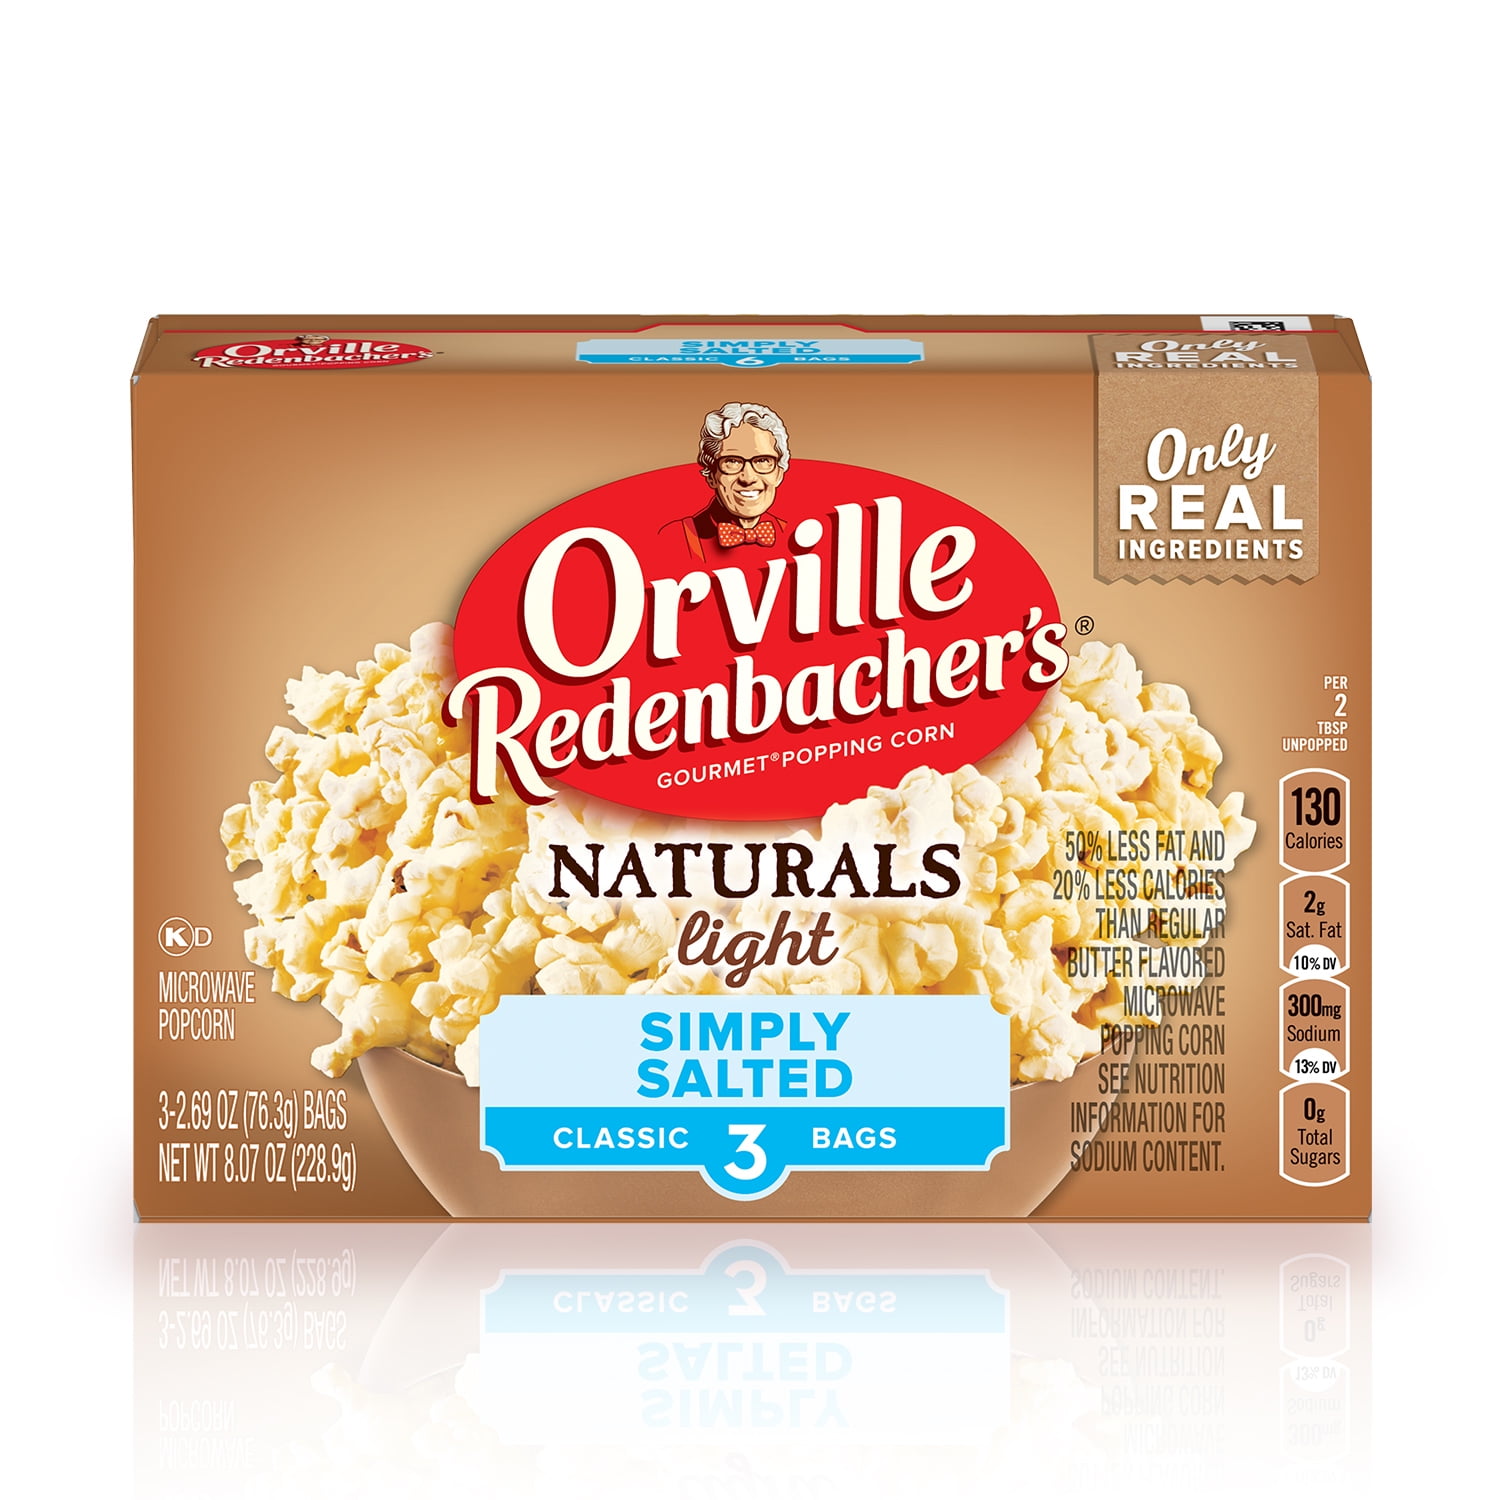 Orville Redenbachers Naturals Simply Salted Popcorn Classic Bag 2.69 Oz ...